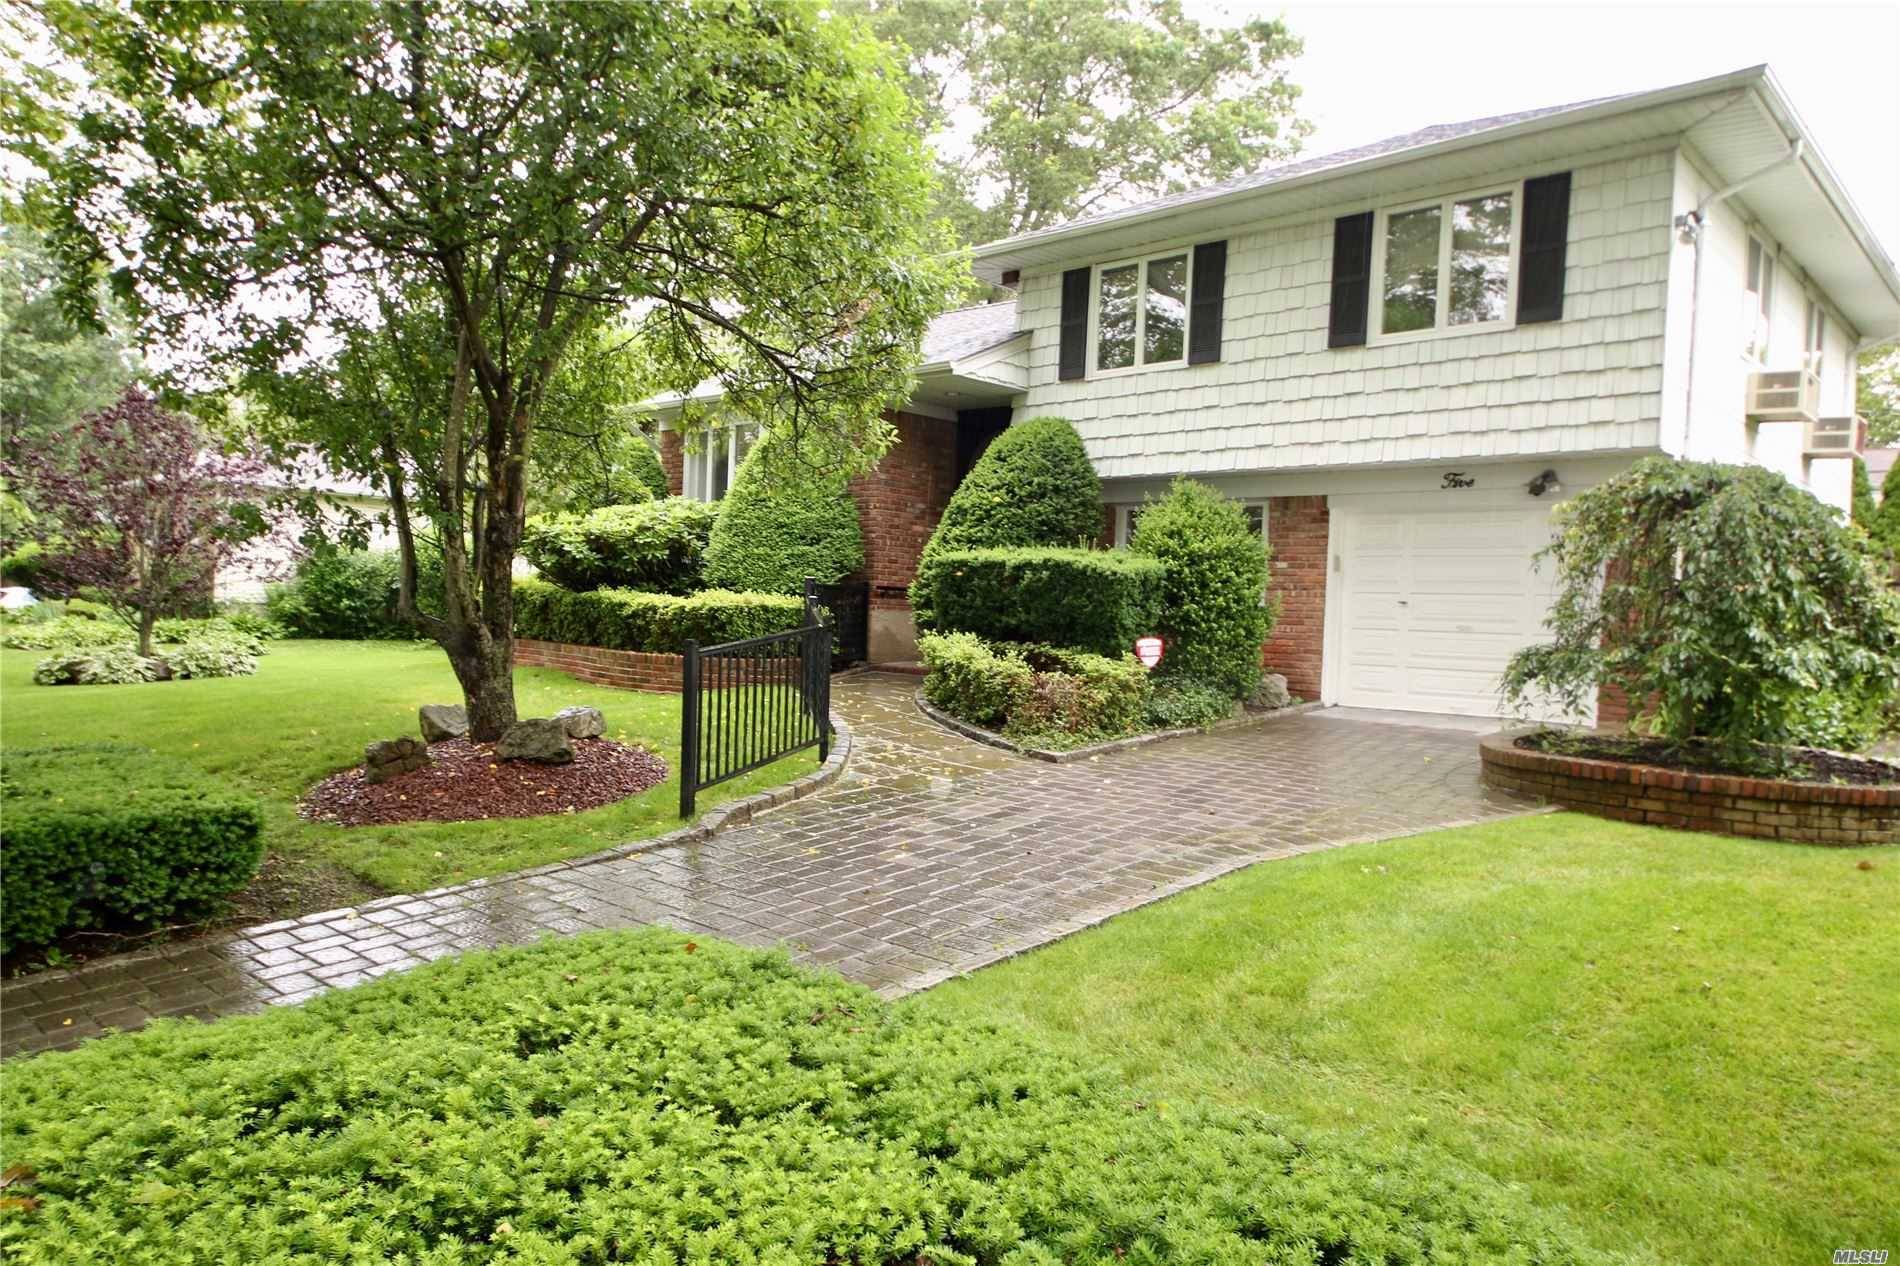 Located On Tree Lined Street, In The Sought After Melville Triangle Area.